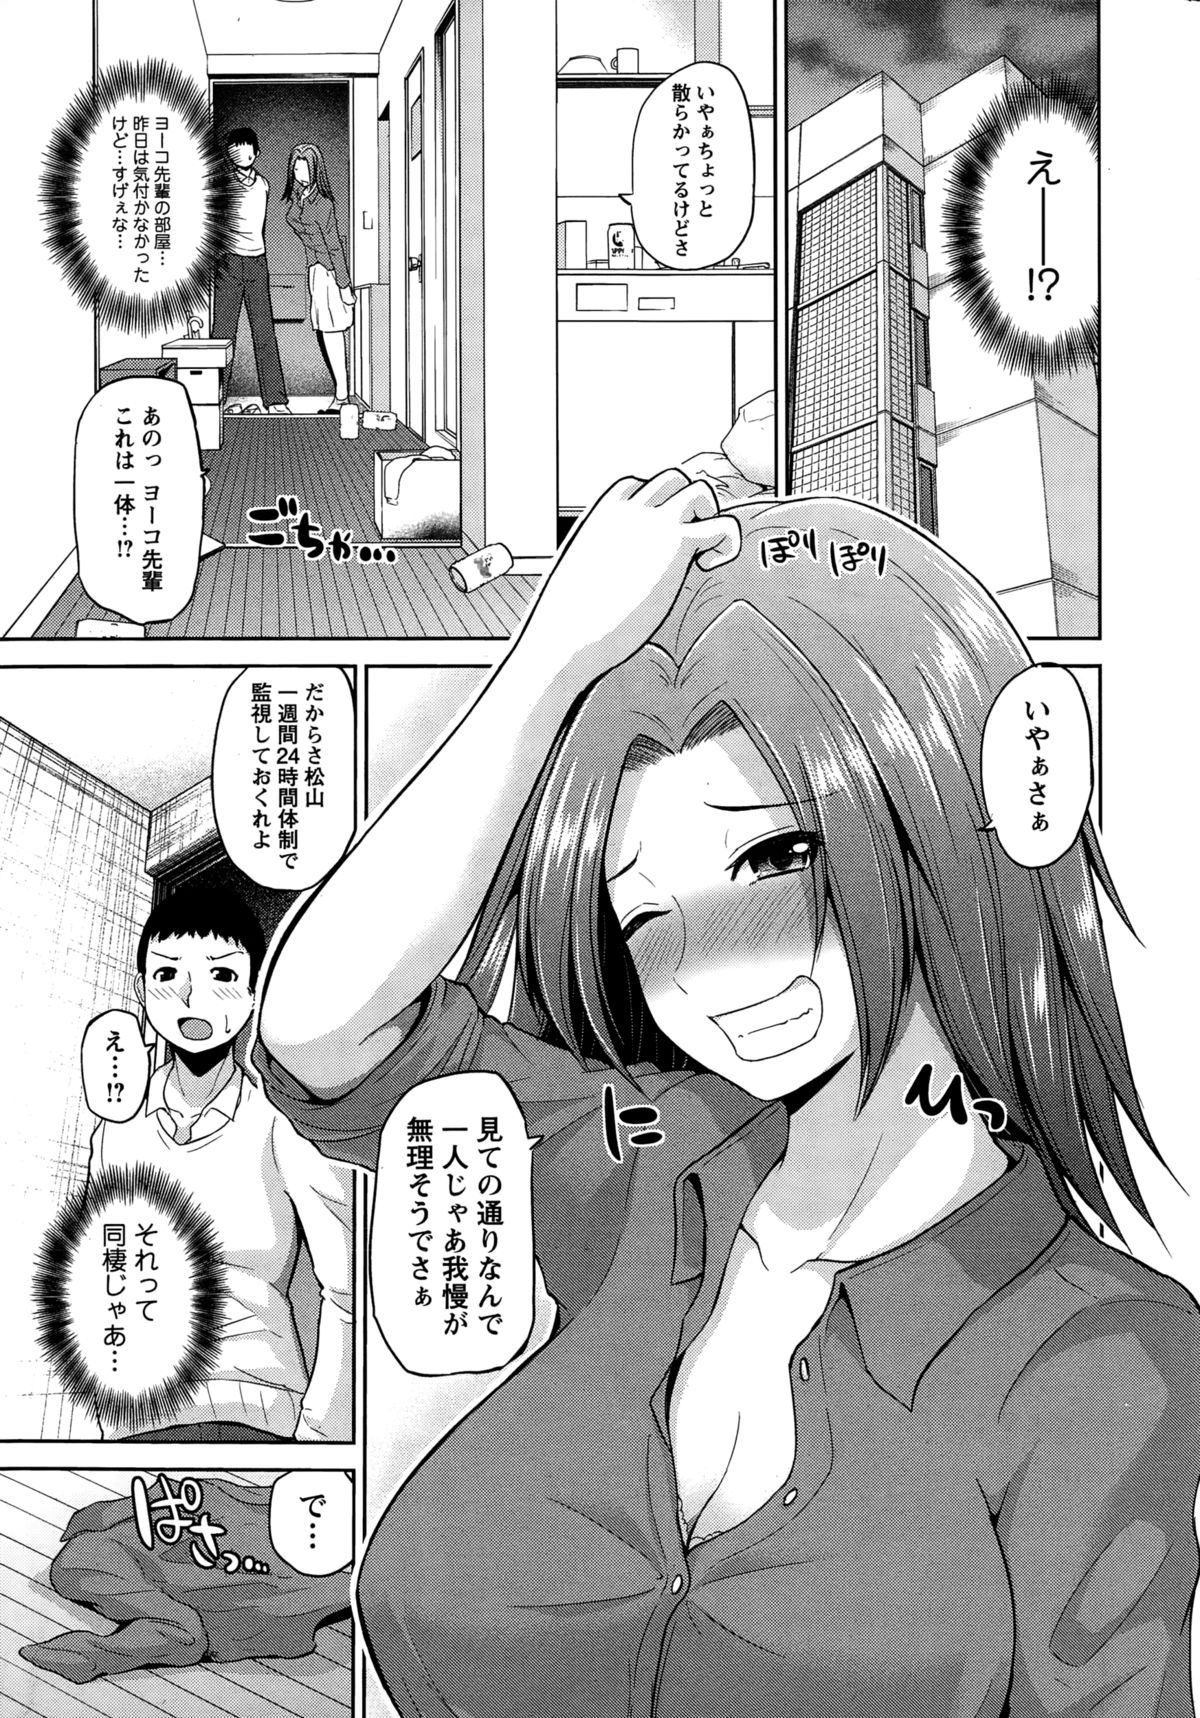 Action Pizazz DX 2015-01 page 15 full